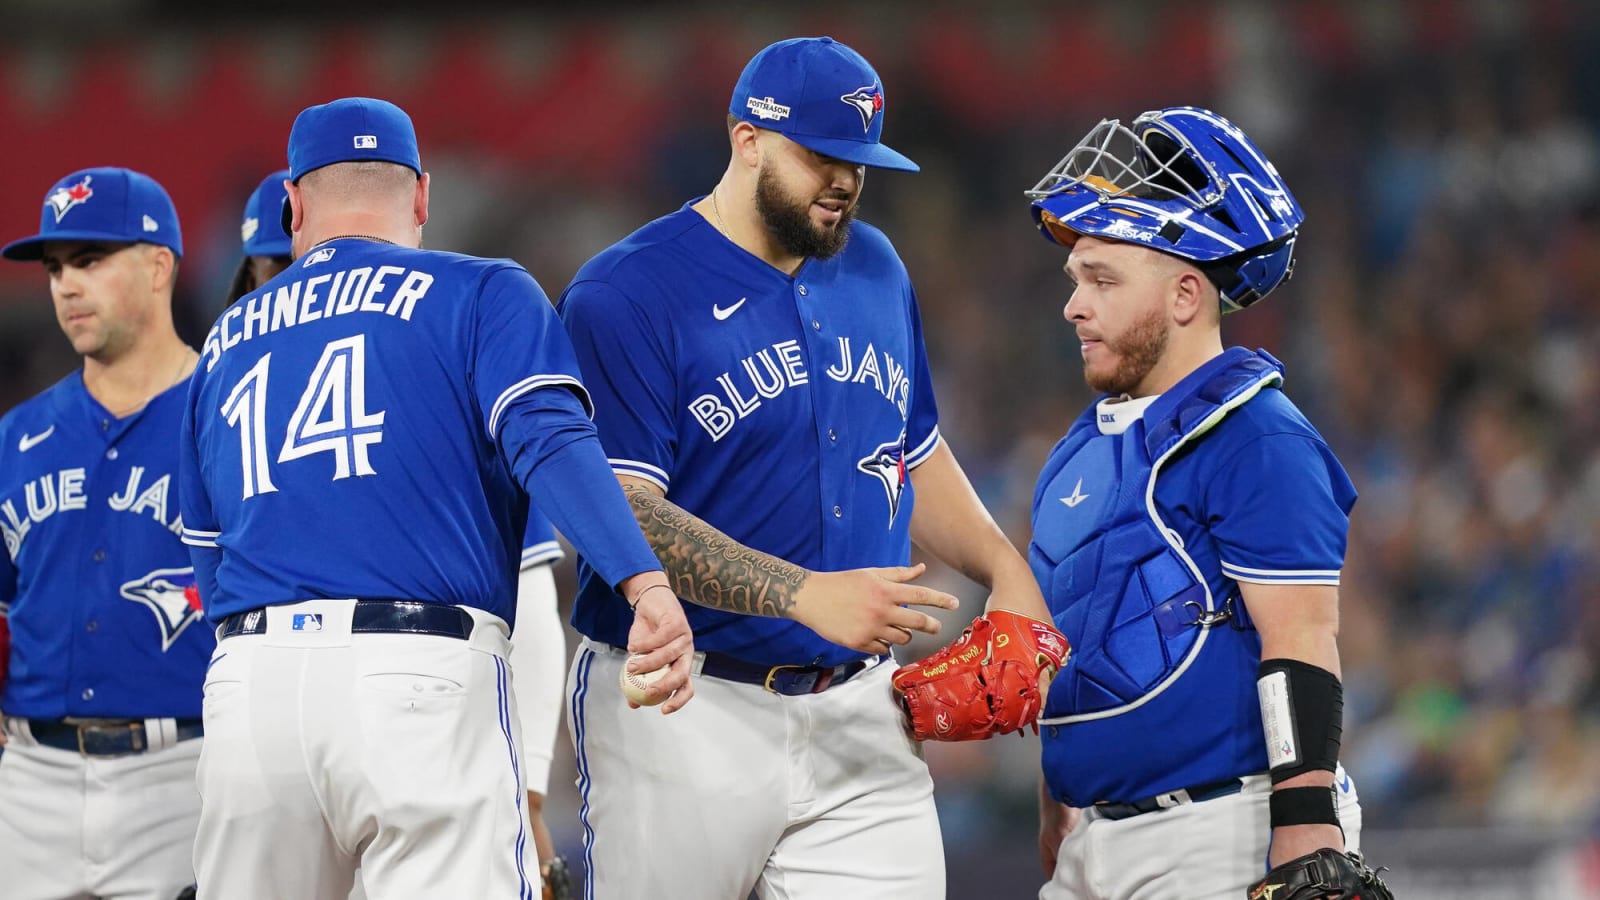 Blue Jays Pitchers & the New Outfield Dimensions